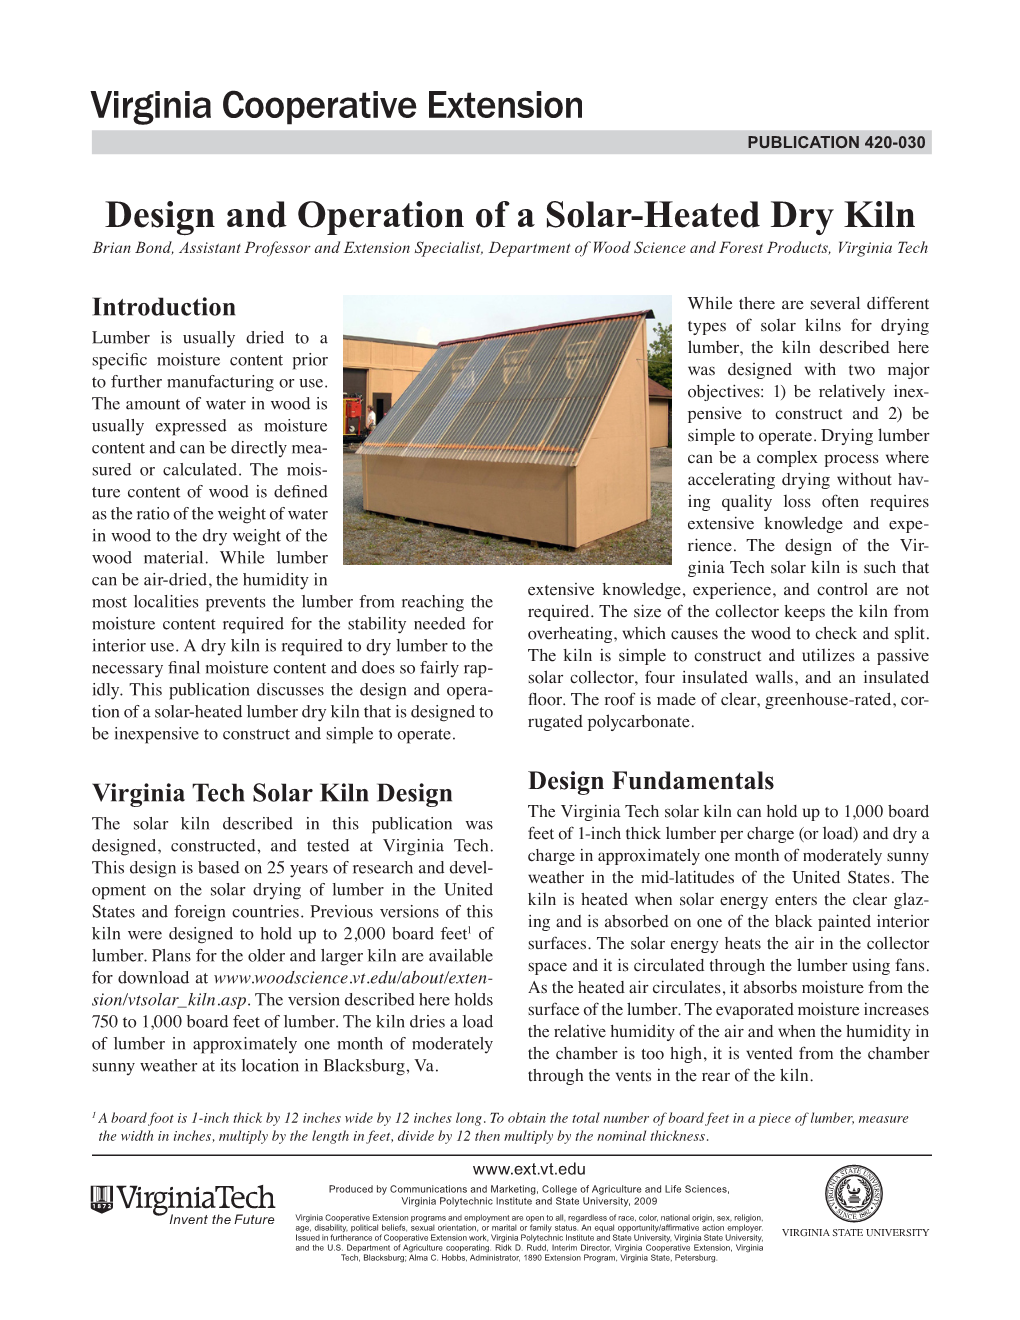 Design and Operation of a Solar-Heated Dry Kiln